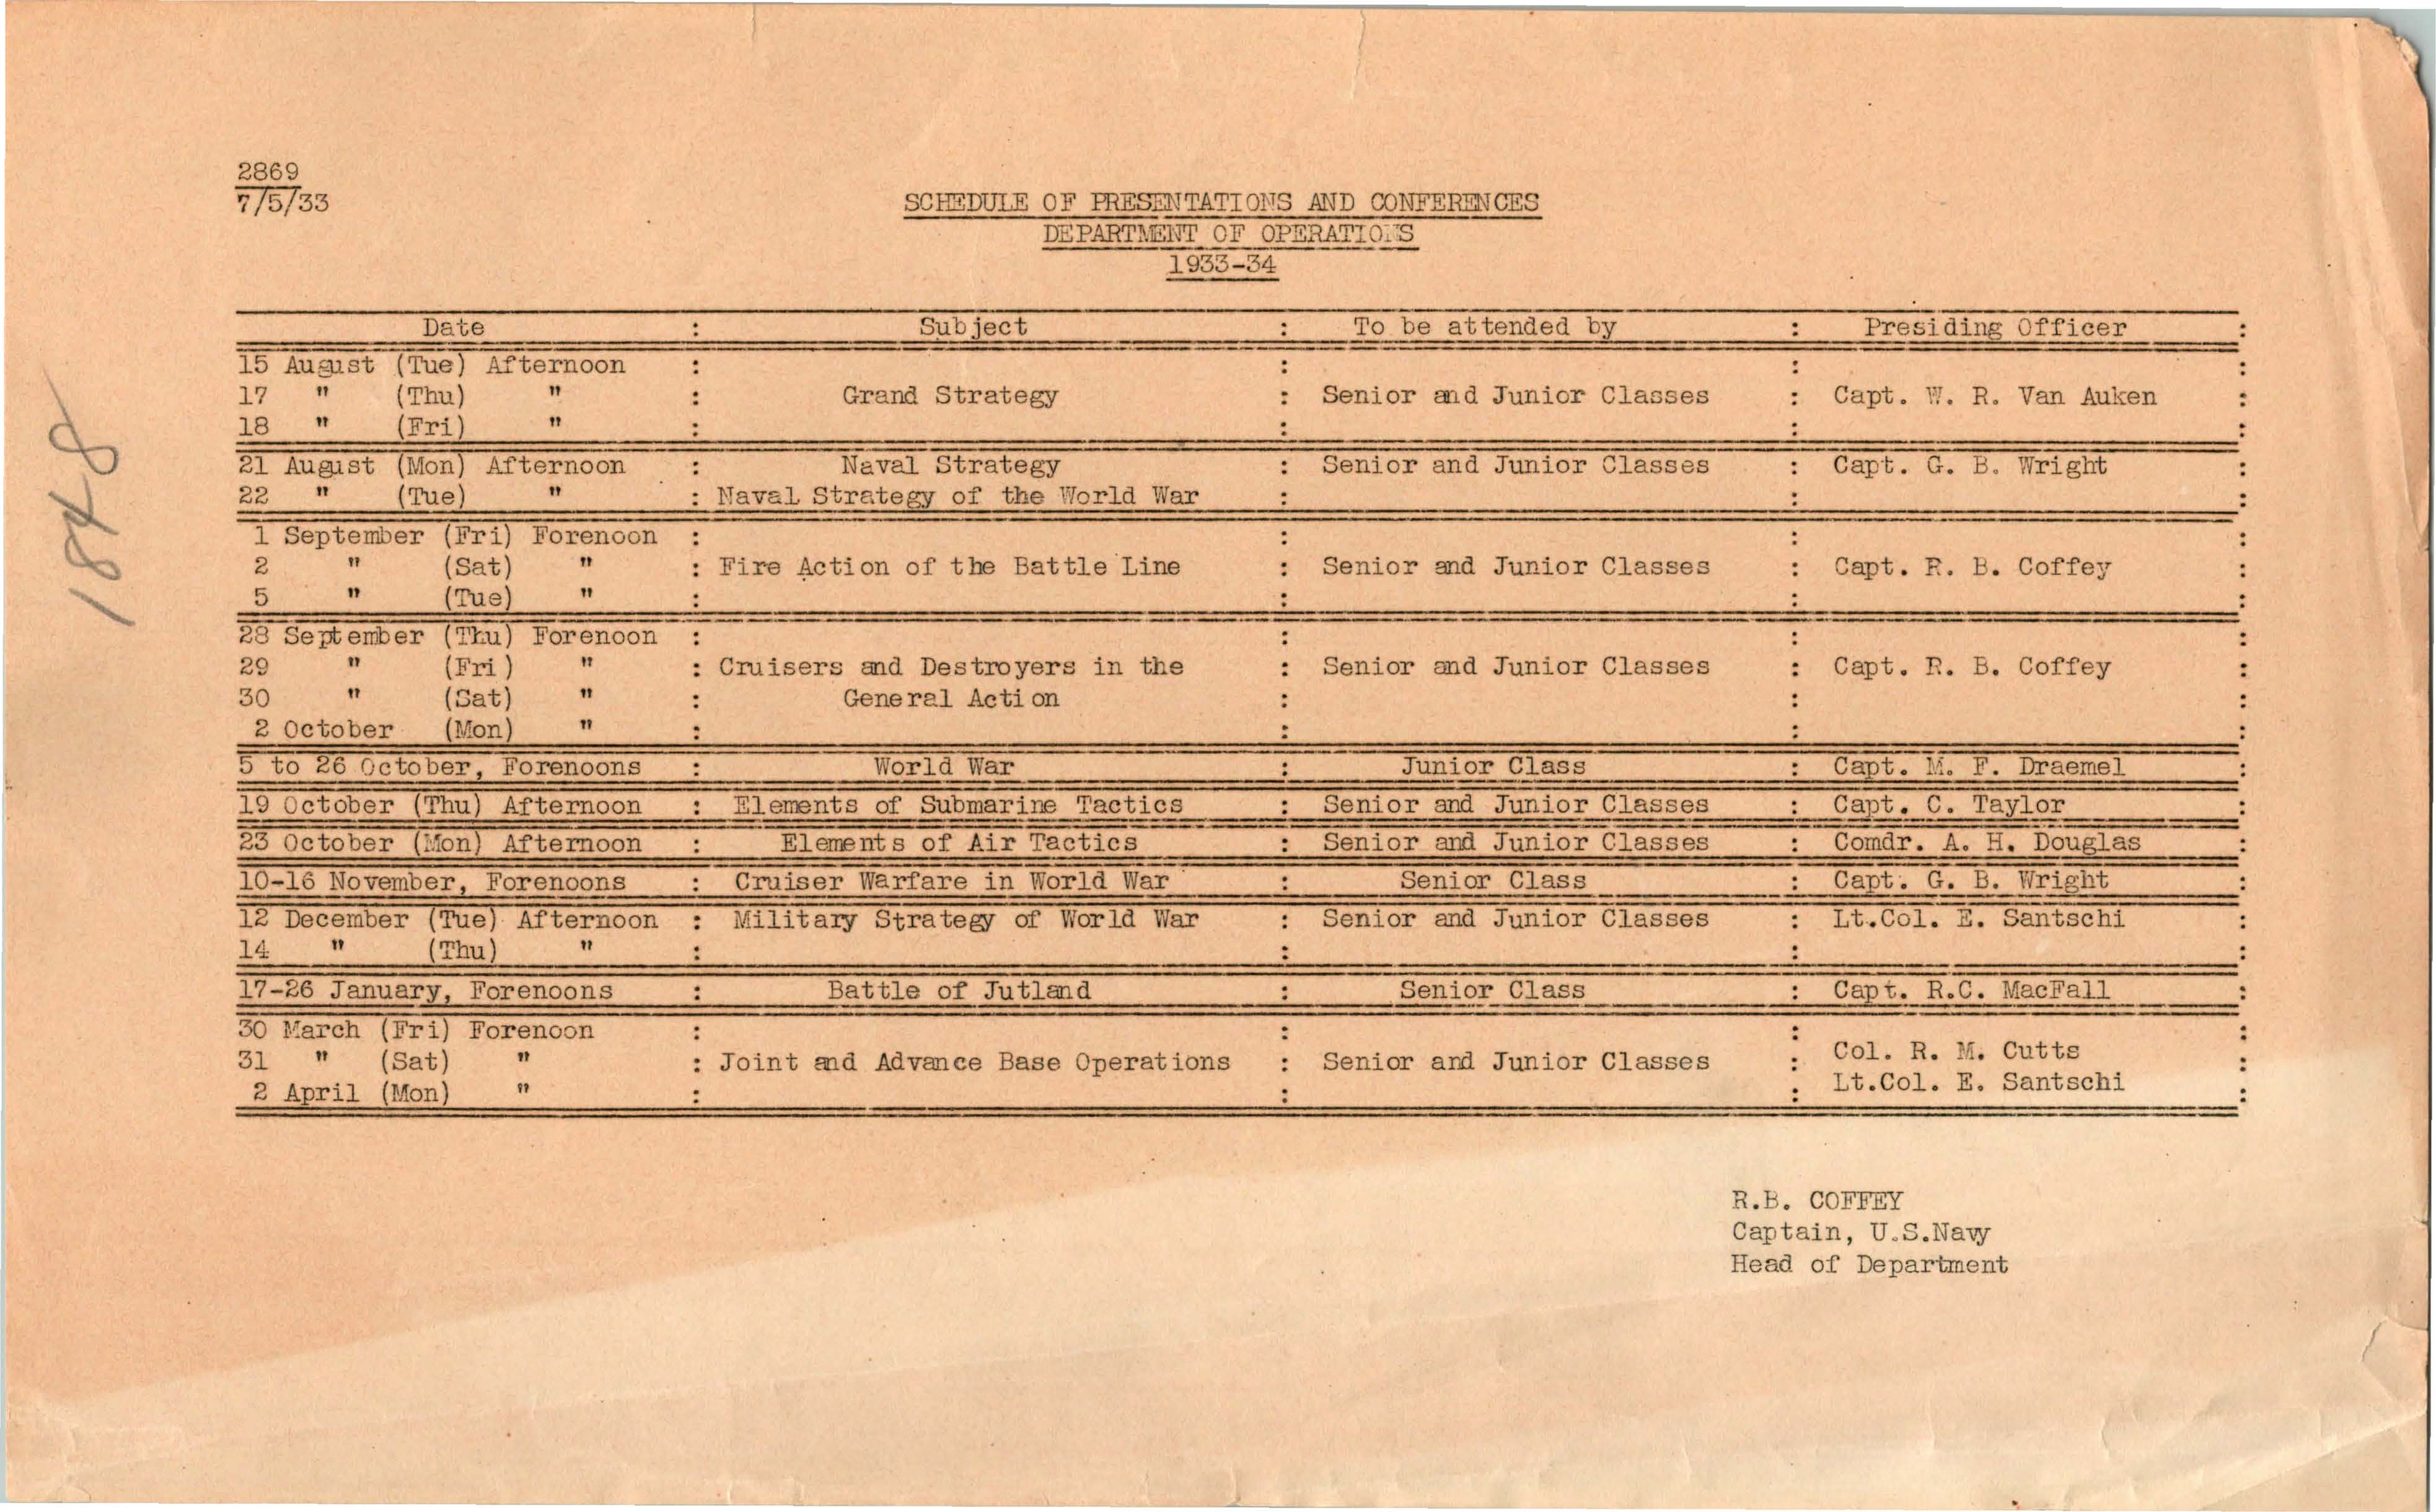 Schedule of Presentations and Conferences, 1933-1934